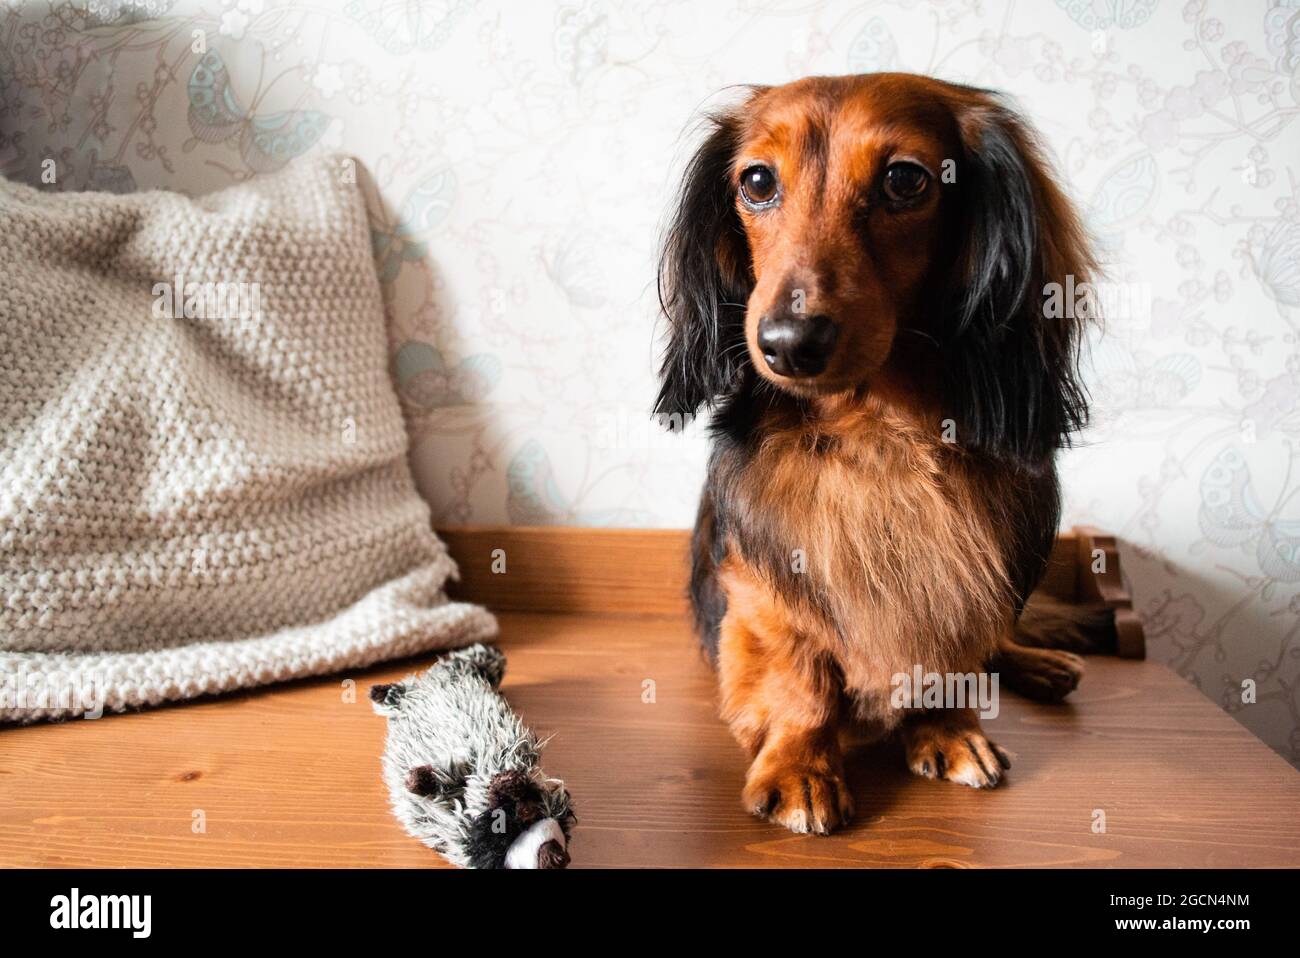 Full-length portrait of well-groomed long-haired dachshund red and black color, with his dogs toy. Stock Photo